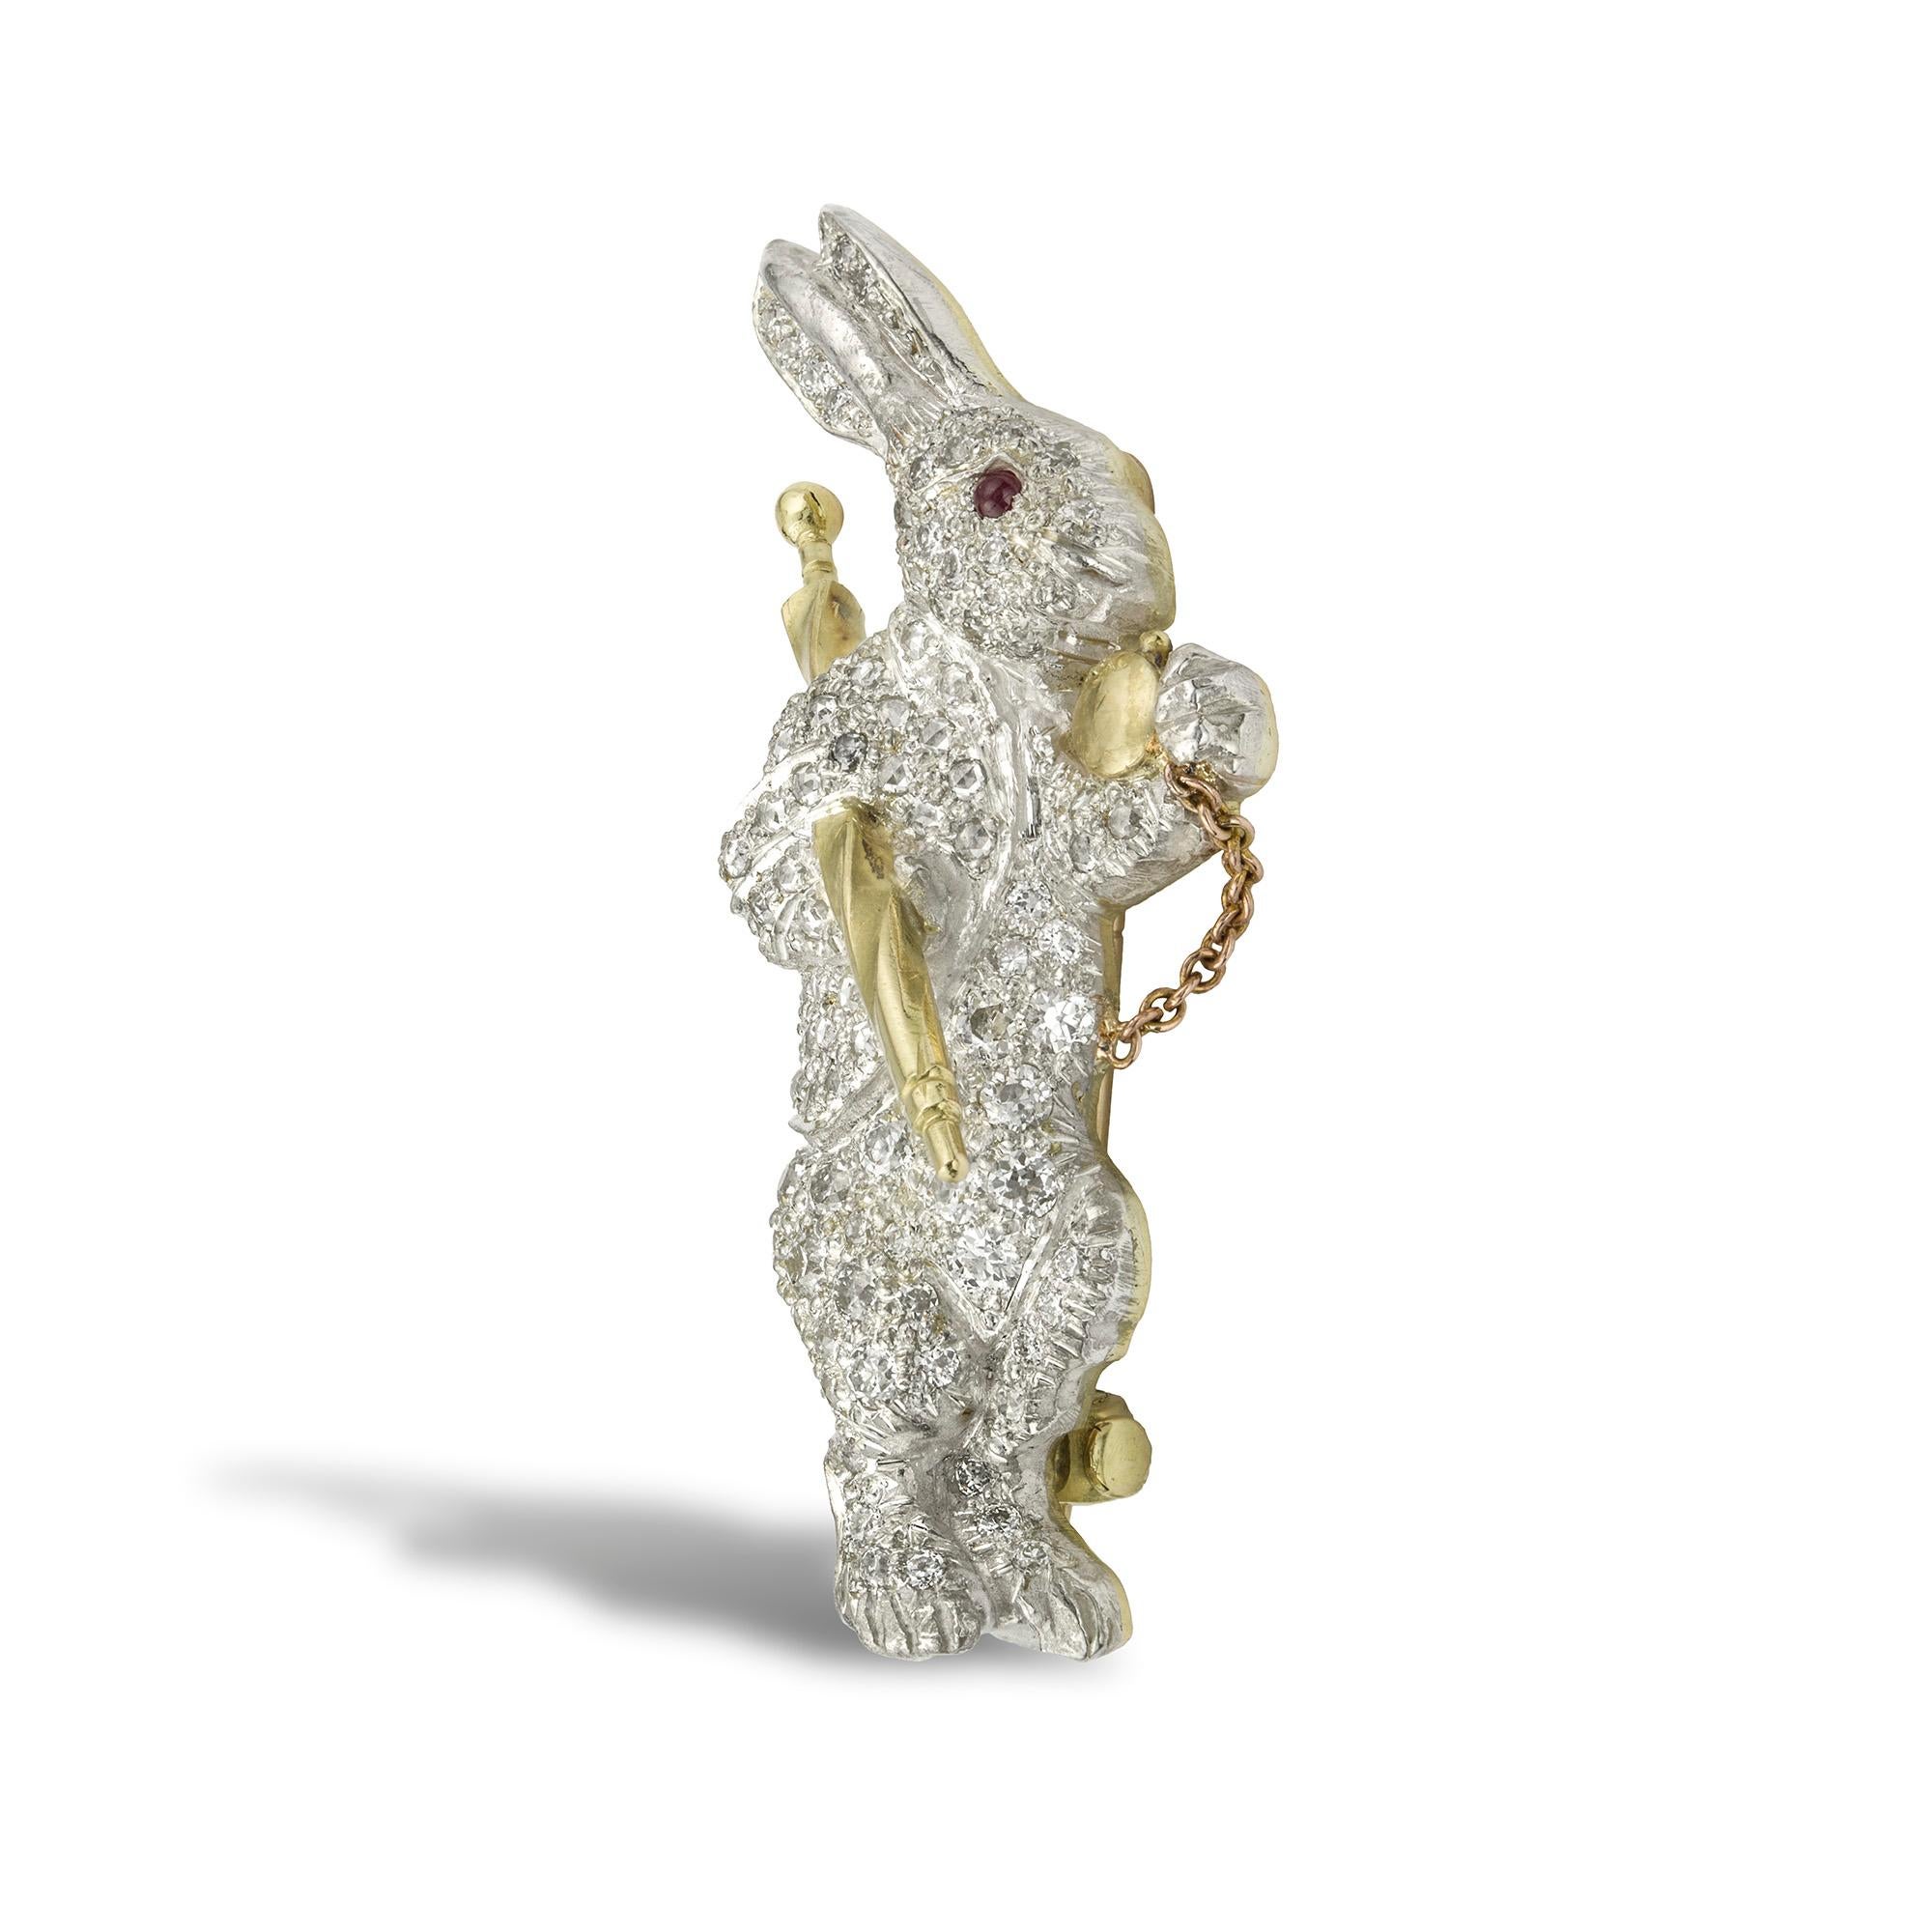 A diamond-set white rabbit brooch, the upright rabbit carrying an umbrella under his arm and a yellow gold pocket watch in his hand, set throughout with brilliant-cut diamonds, weighing a total of 1.10 carats, with a ruby eye, all set in silver to a